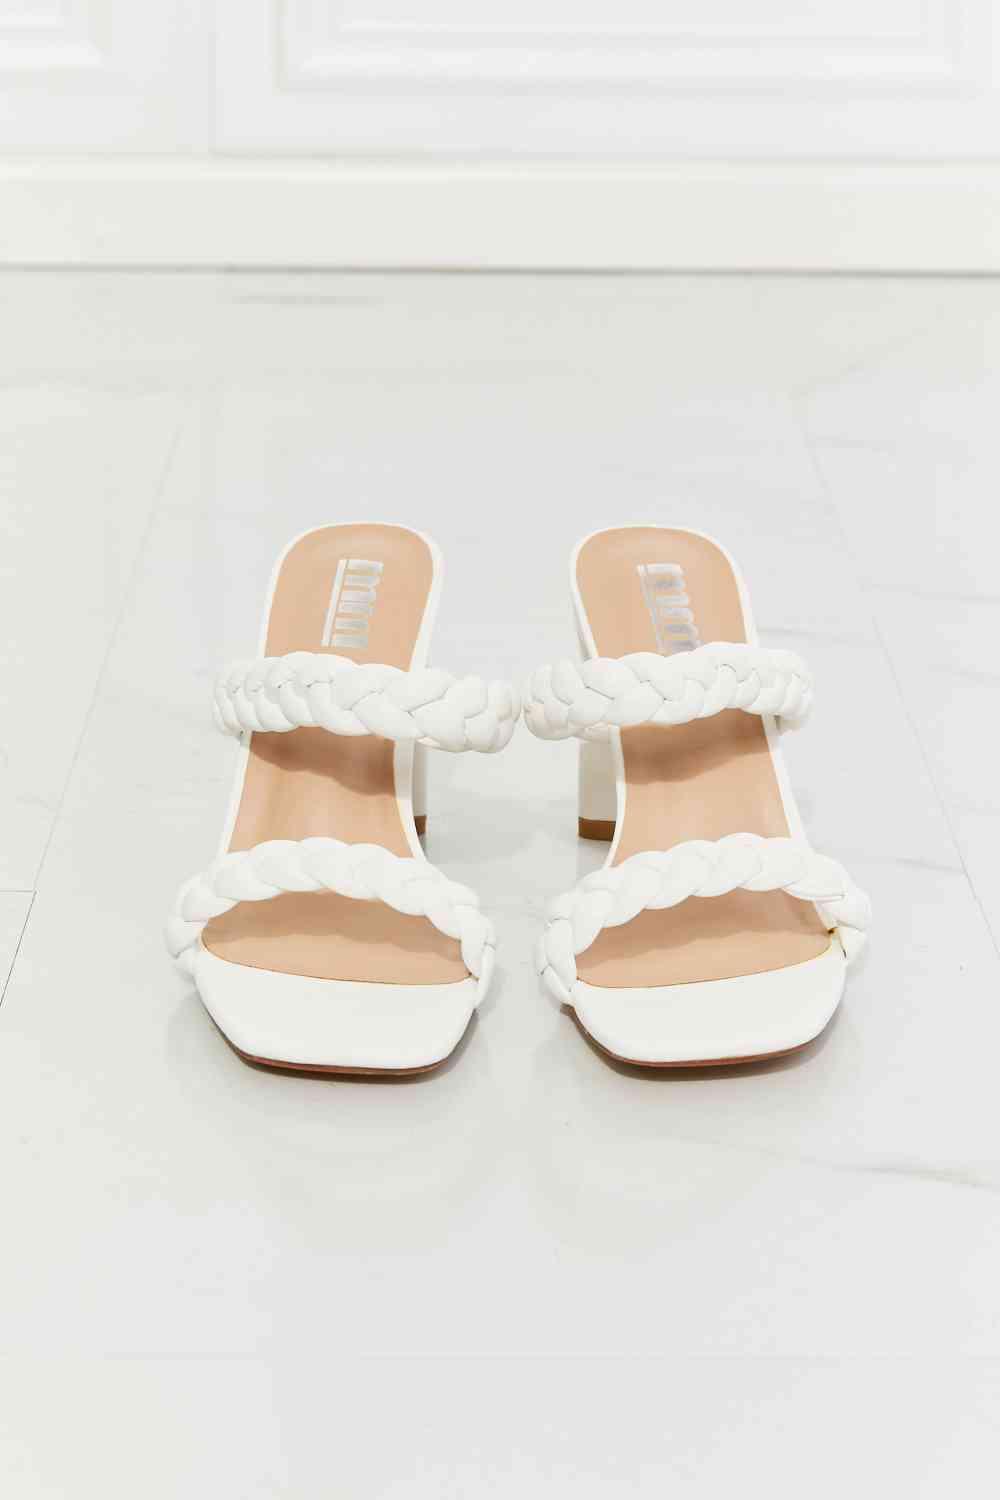 MMShoes In Love Double Braided Block Heel Sandal in White - Lab Fashion, Home & Health